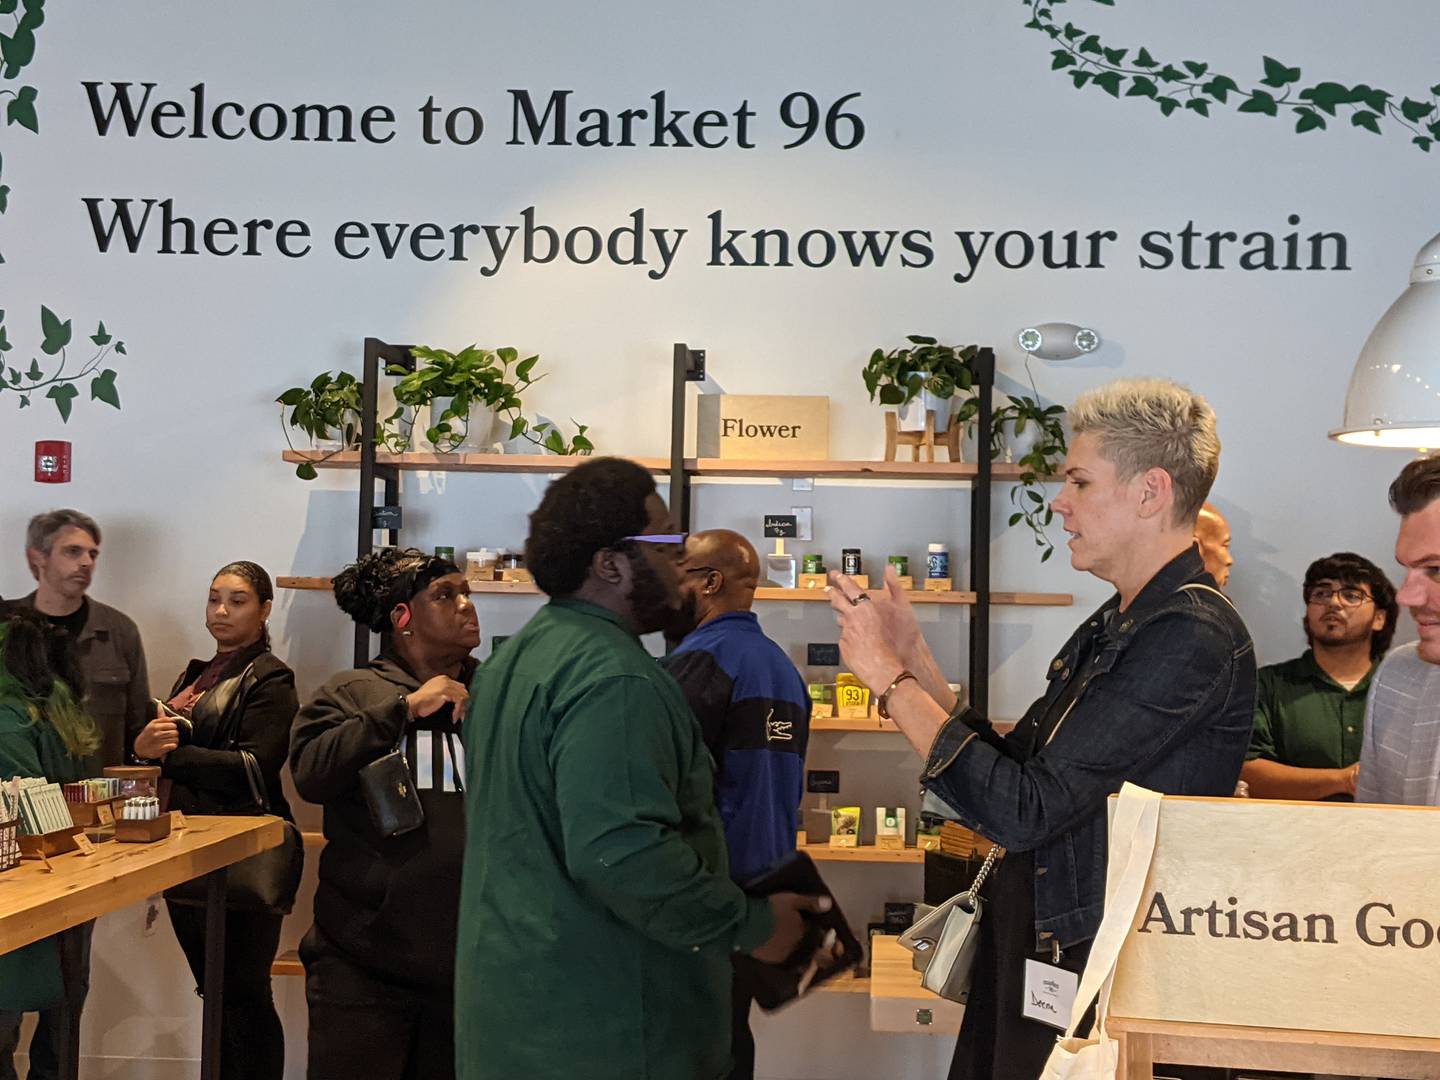 Market 96 held a ribbon cutting ceremony and open house on Sept. 14 at its new marijuana dispensary at 1144 Douglas Road in Oswego in the Mason Square shopping center.